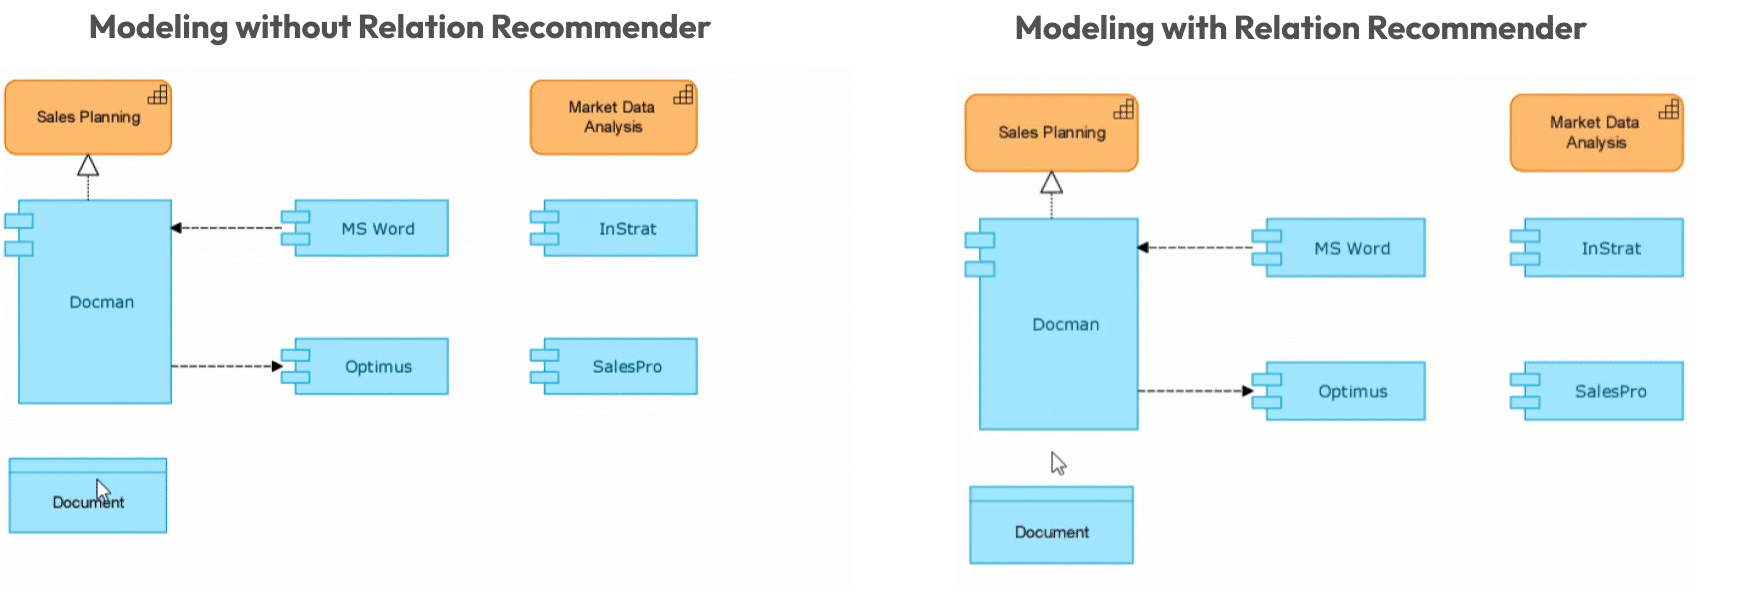 Modeling with and without relation recommender